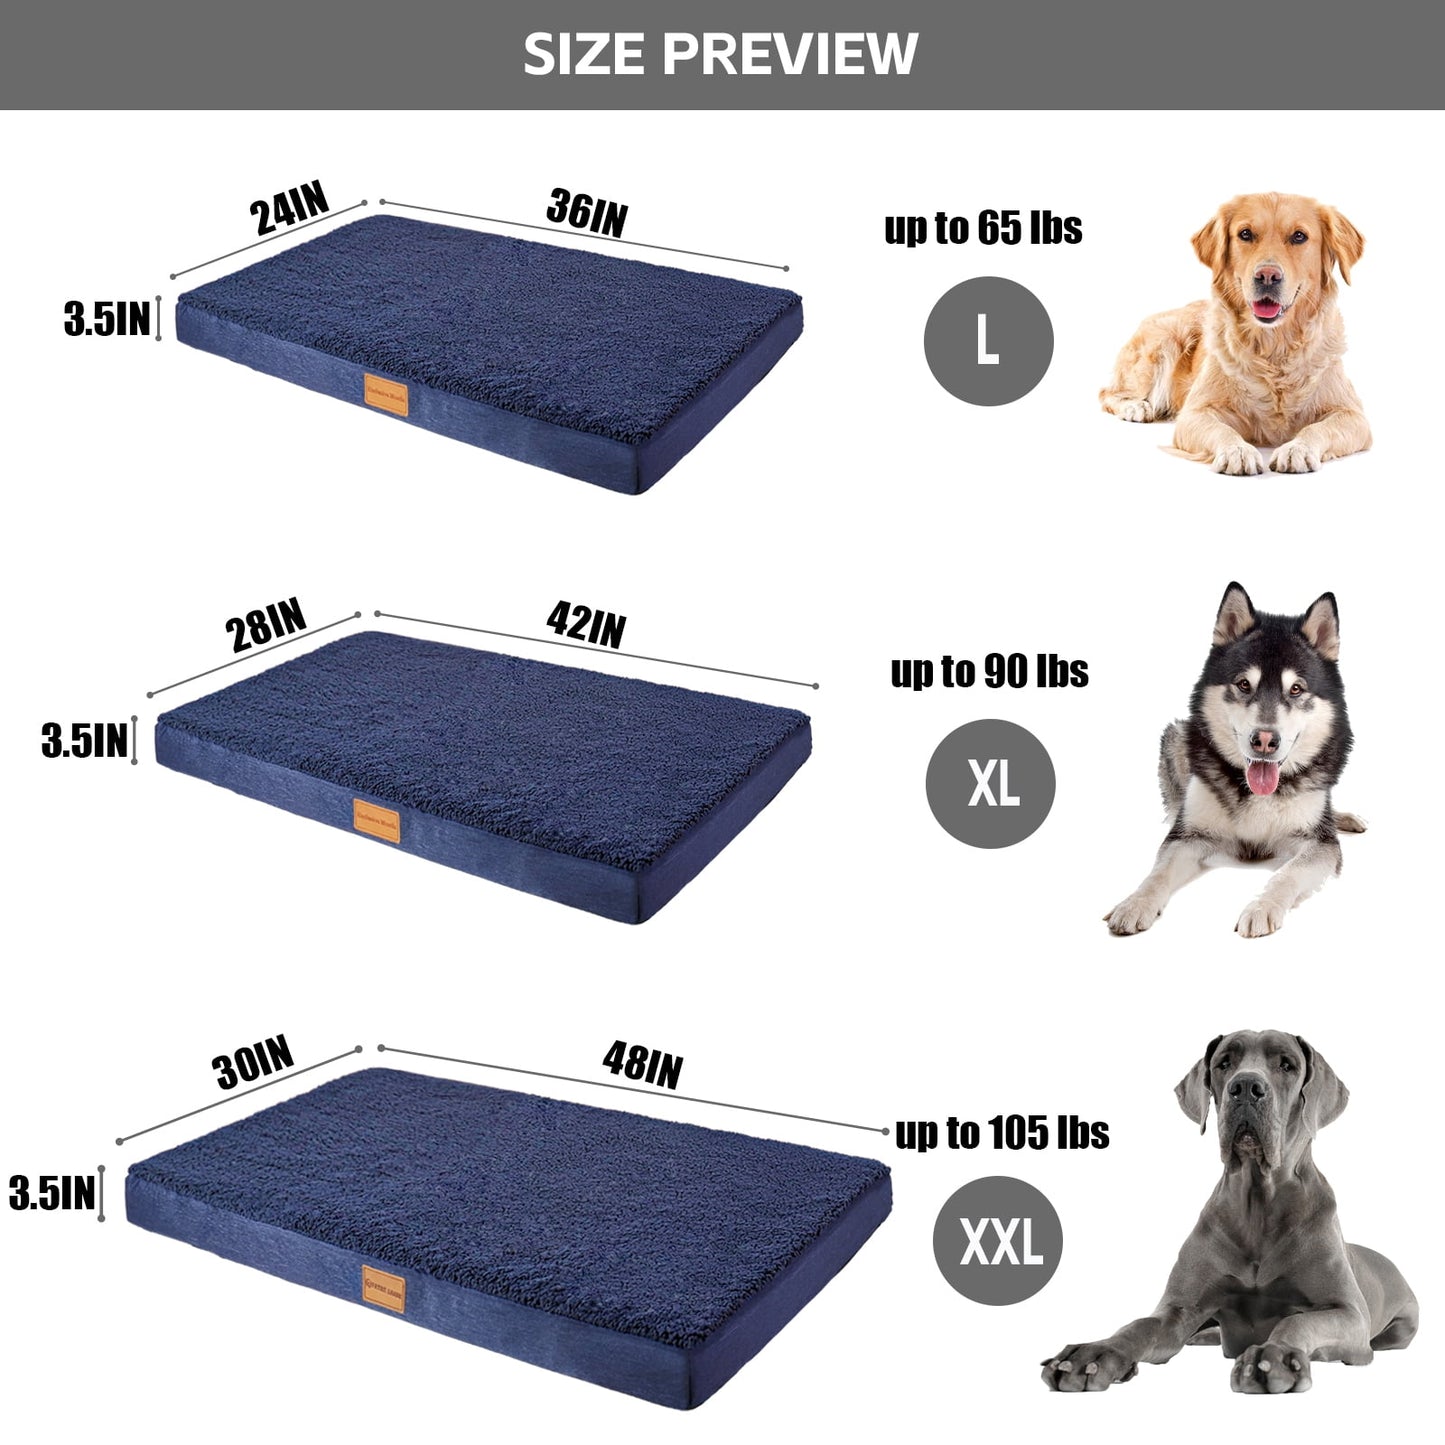 Exclusivo Mezcla Orthopedic Dog Bed for Small Dogs 20''X15'', Egg Crate Foam Small Dog Beds with Removable Washable Cover,Waterproof Pet Bed Mat, Navy Blue